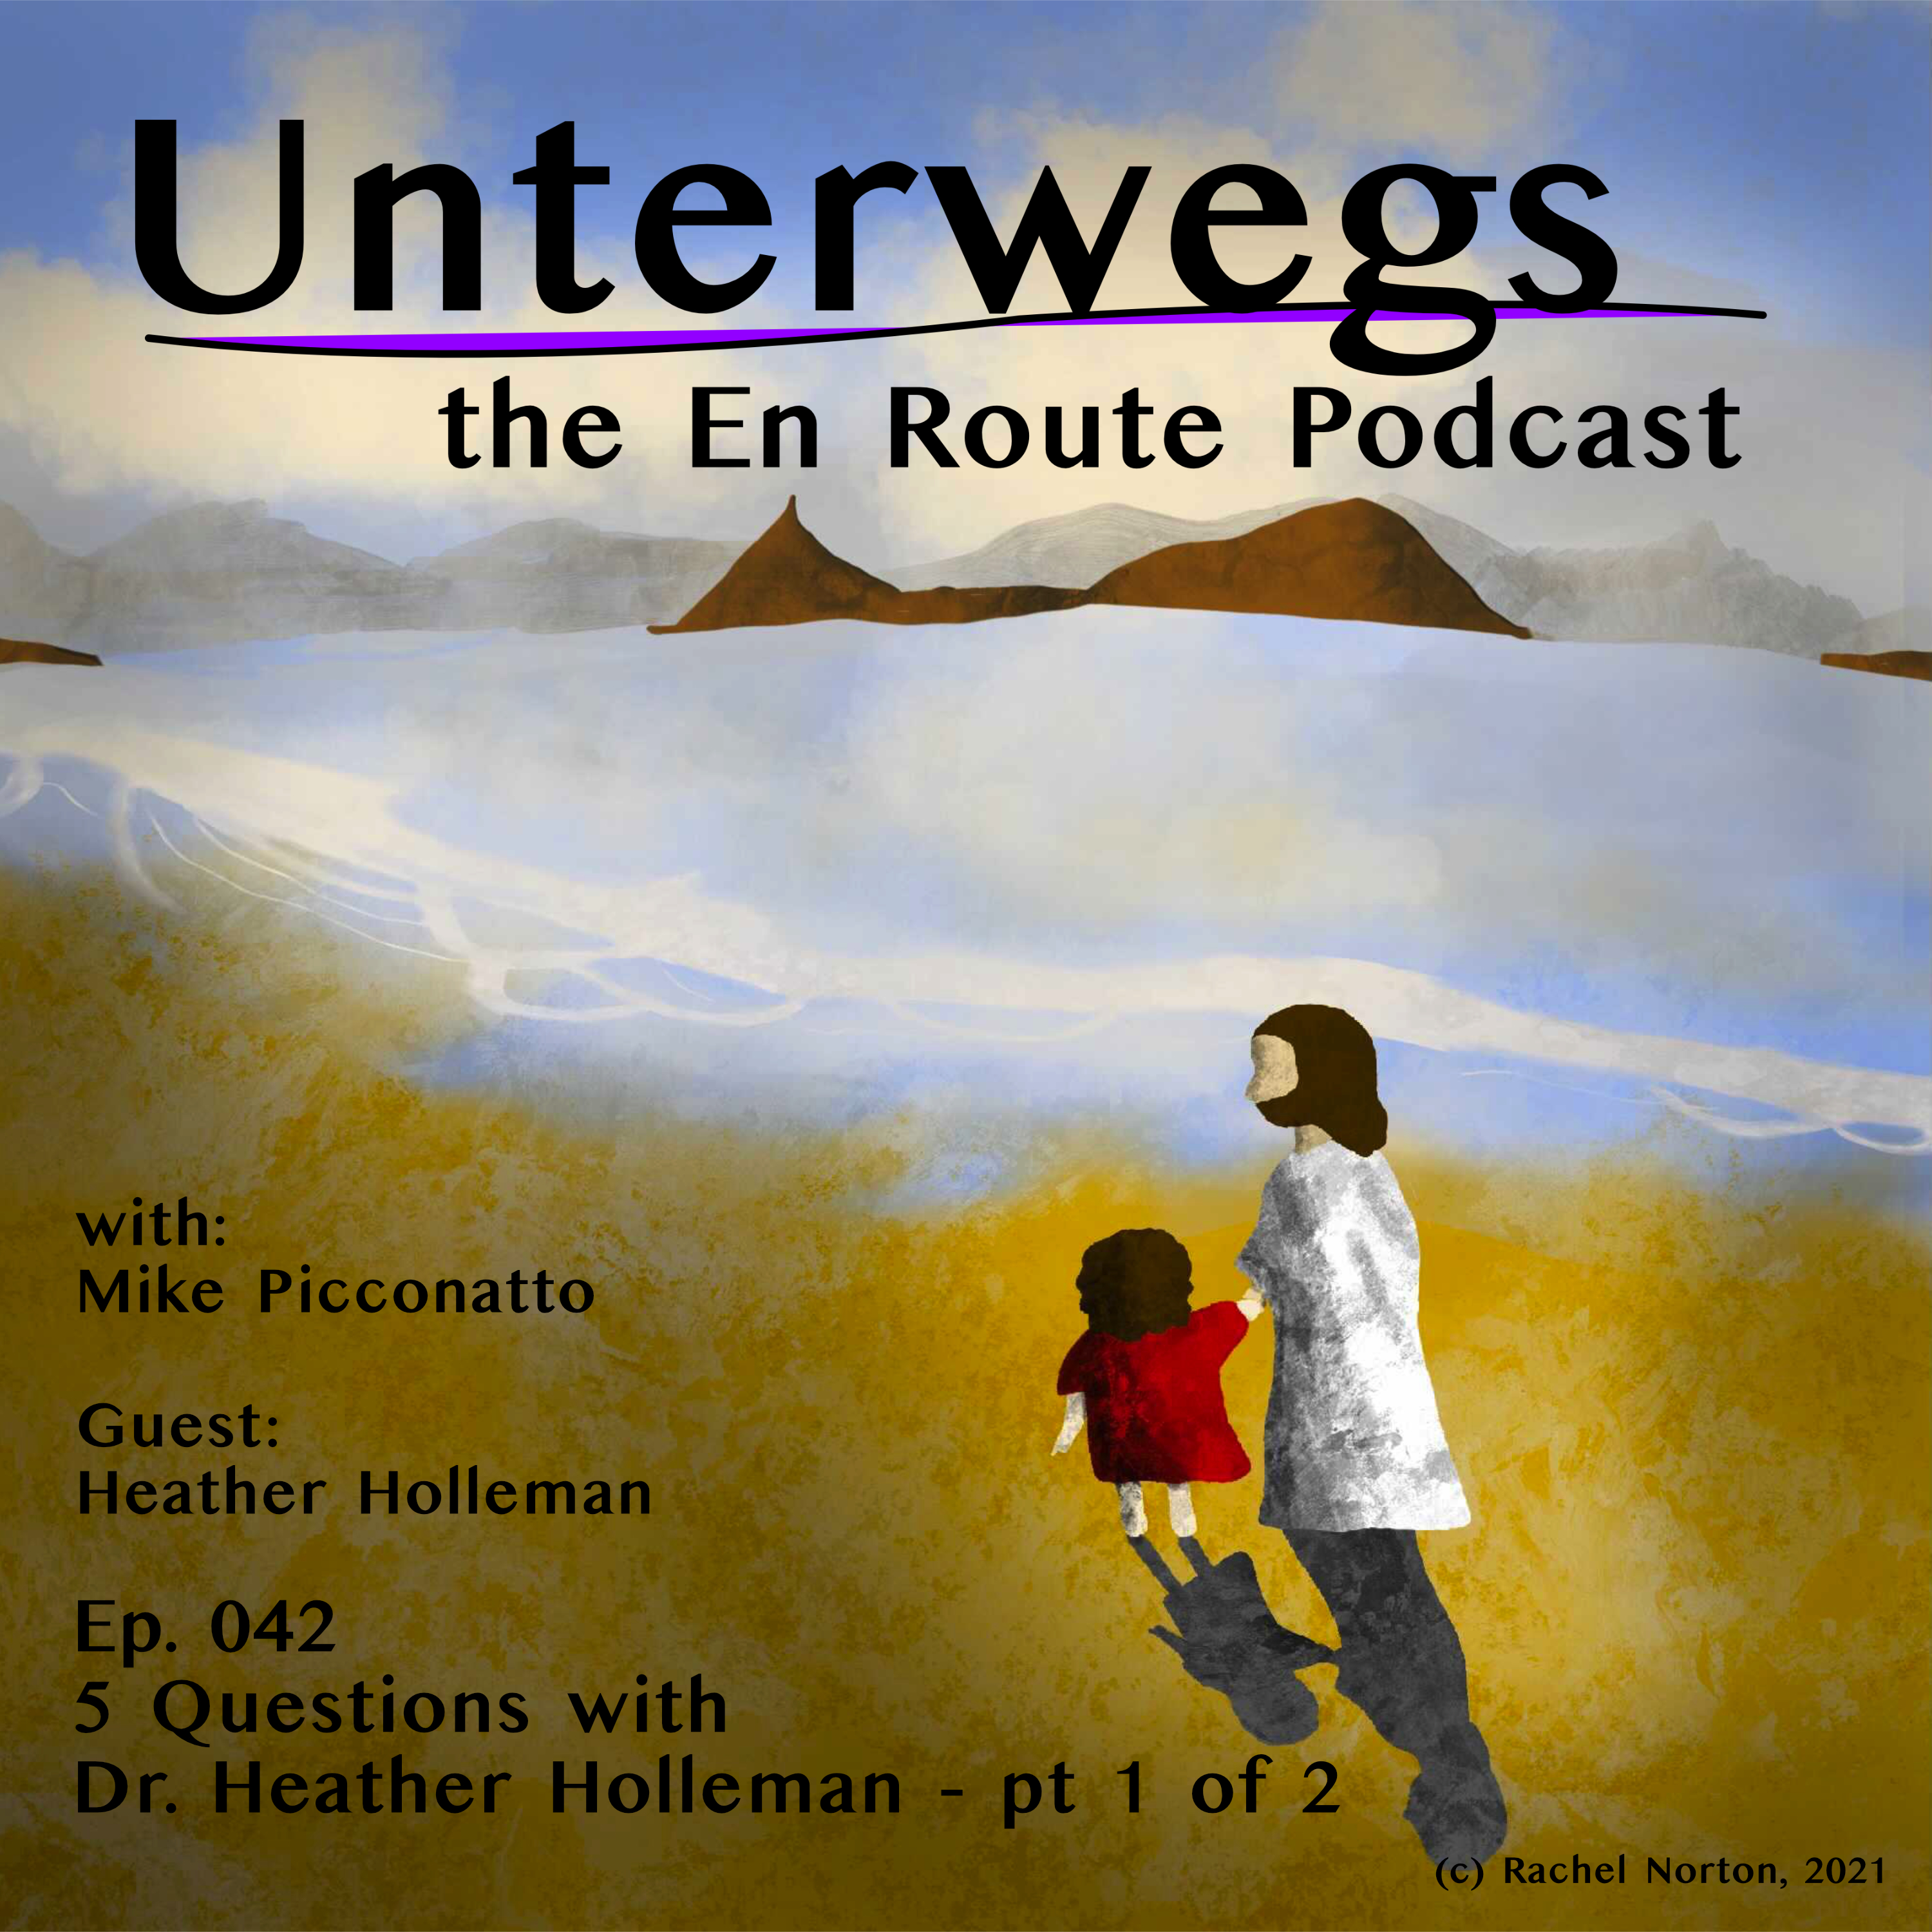 Episode 42 - Five Questions with Dr. Heather Holleman - Part 1 of 2